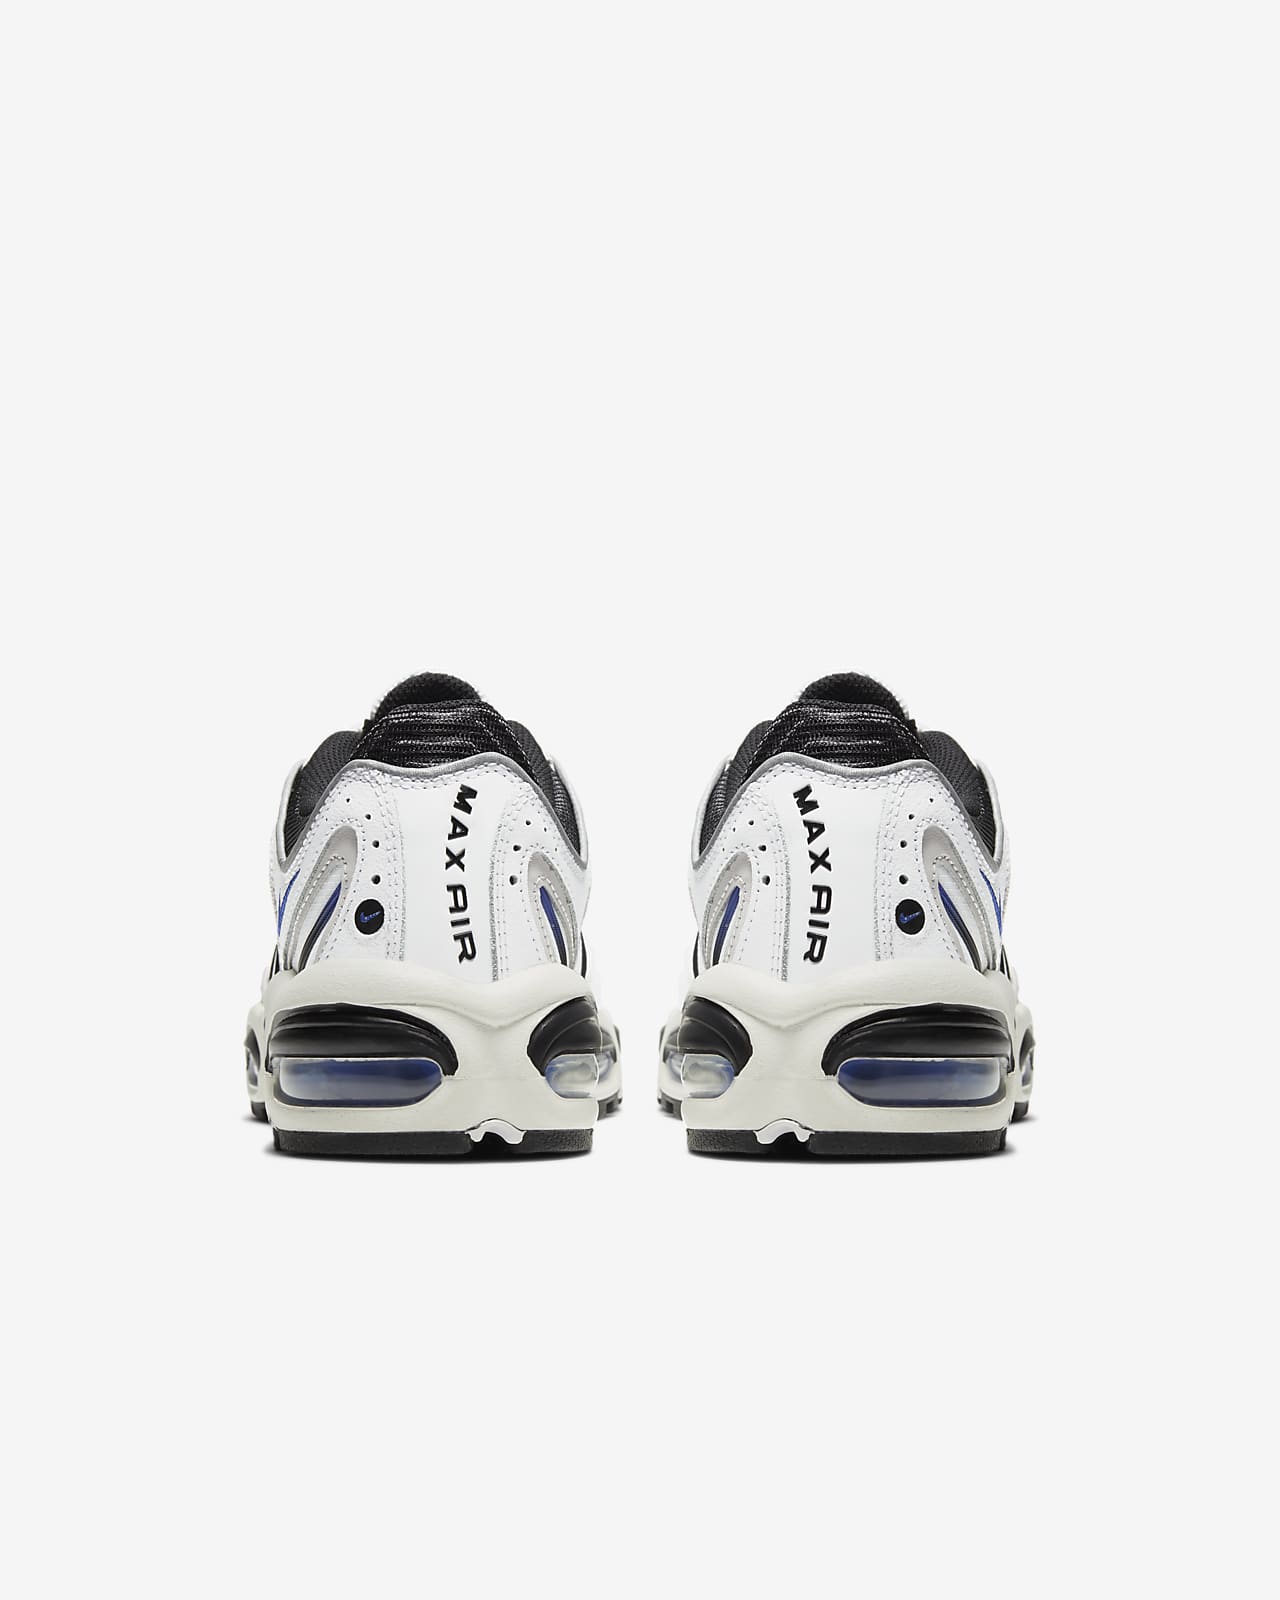 nike air max tailwind iv men's stores